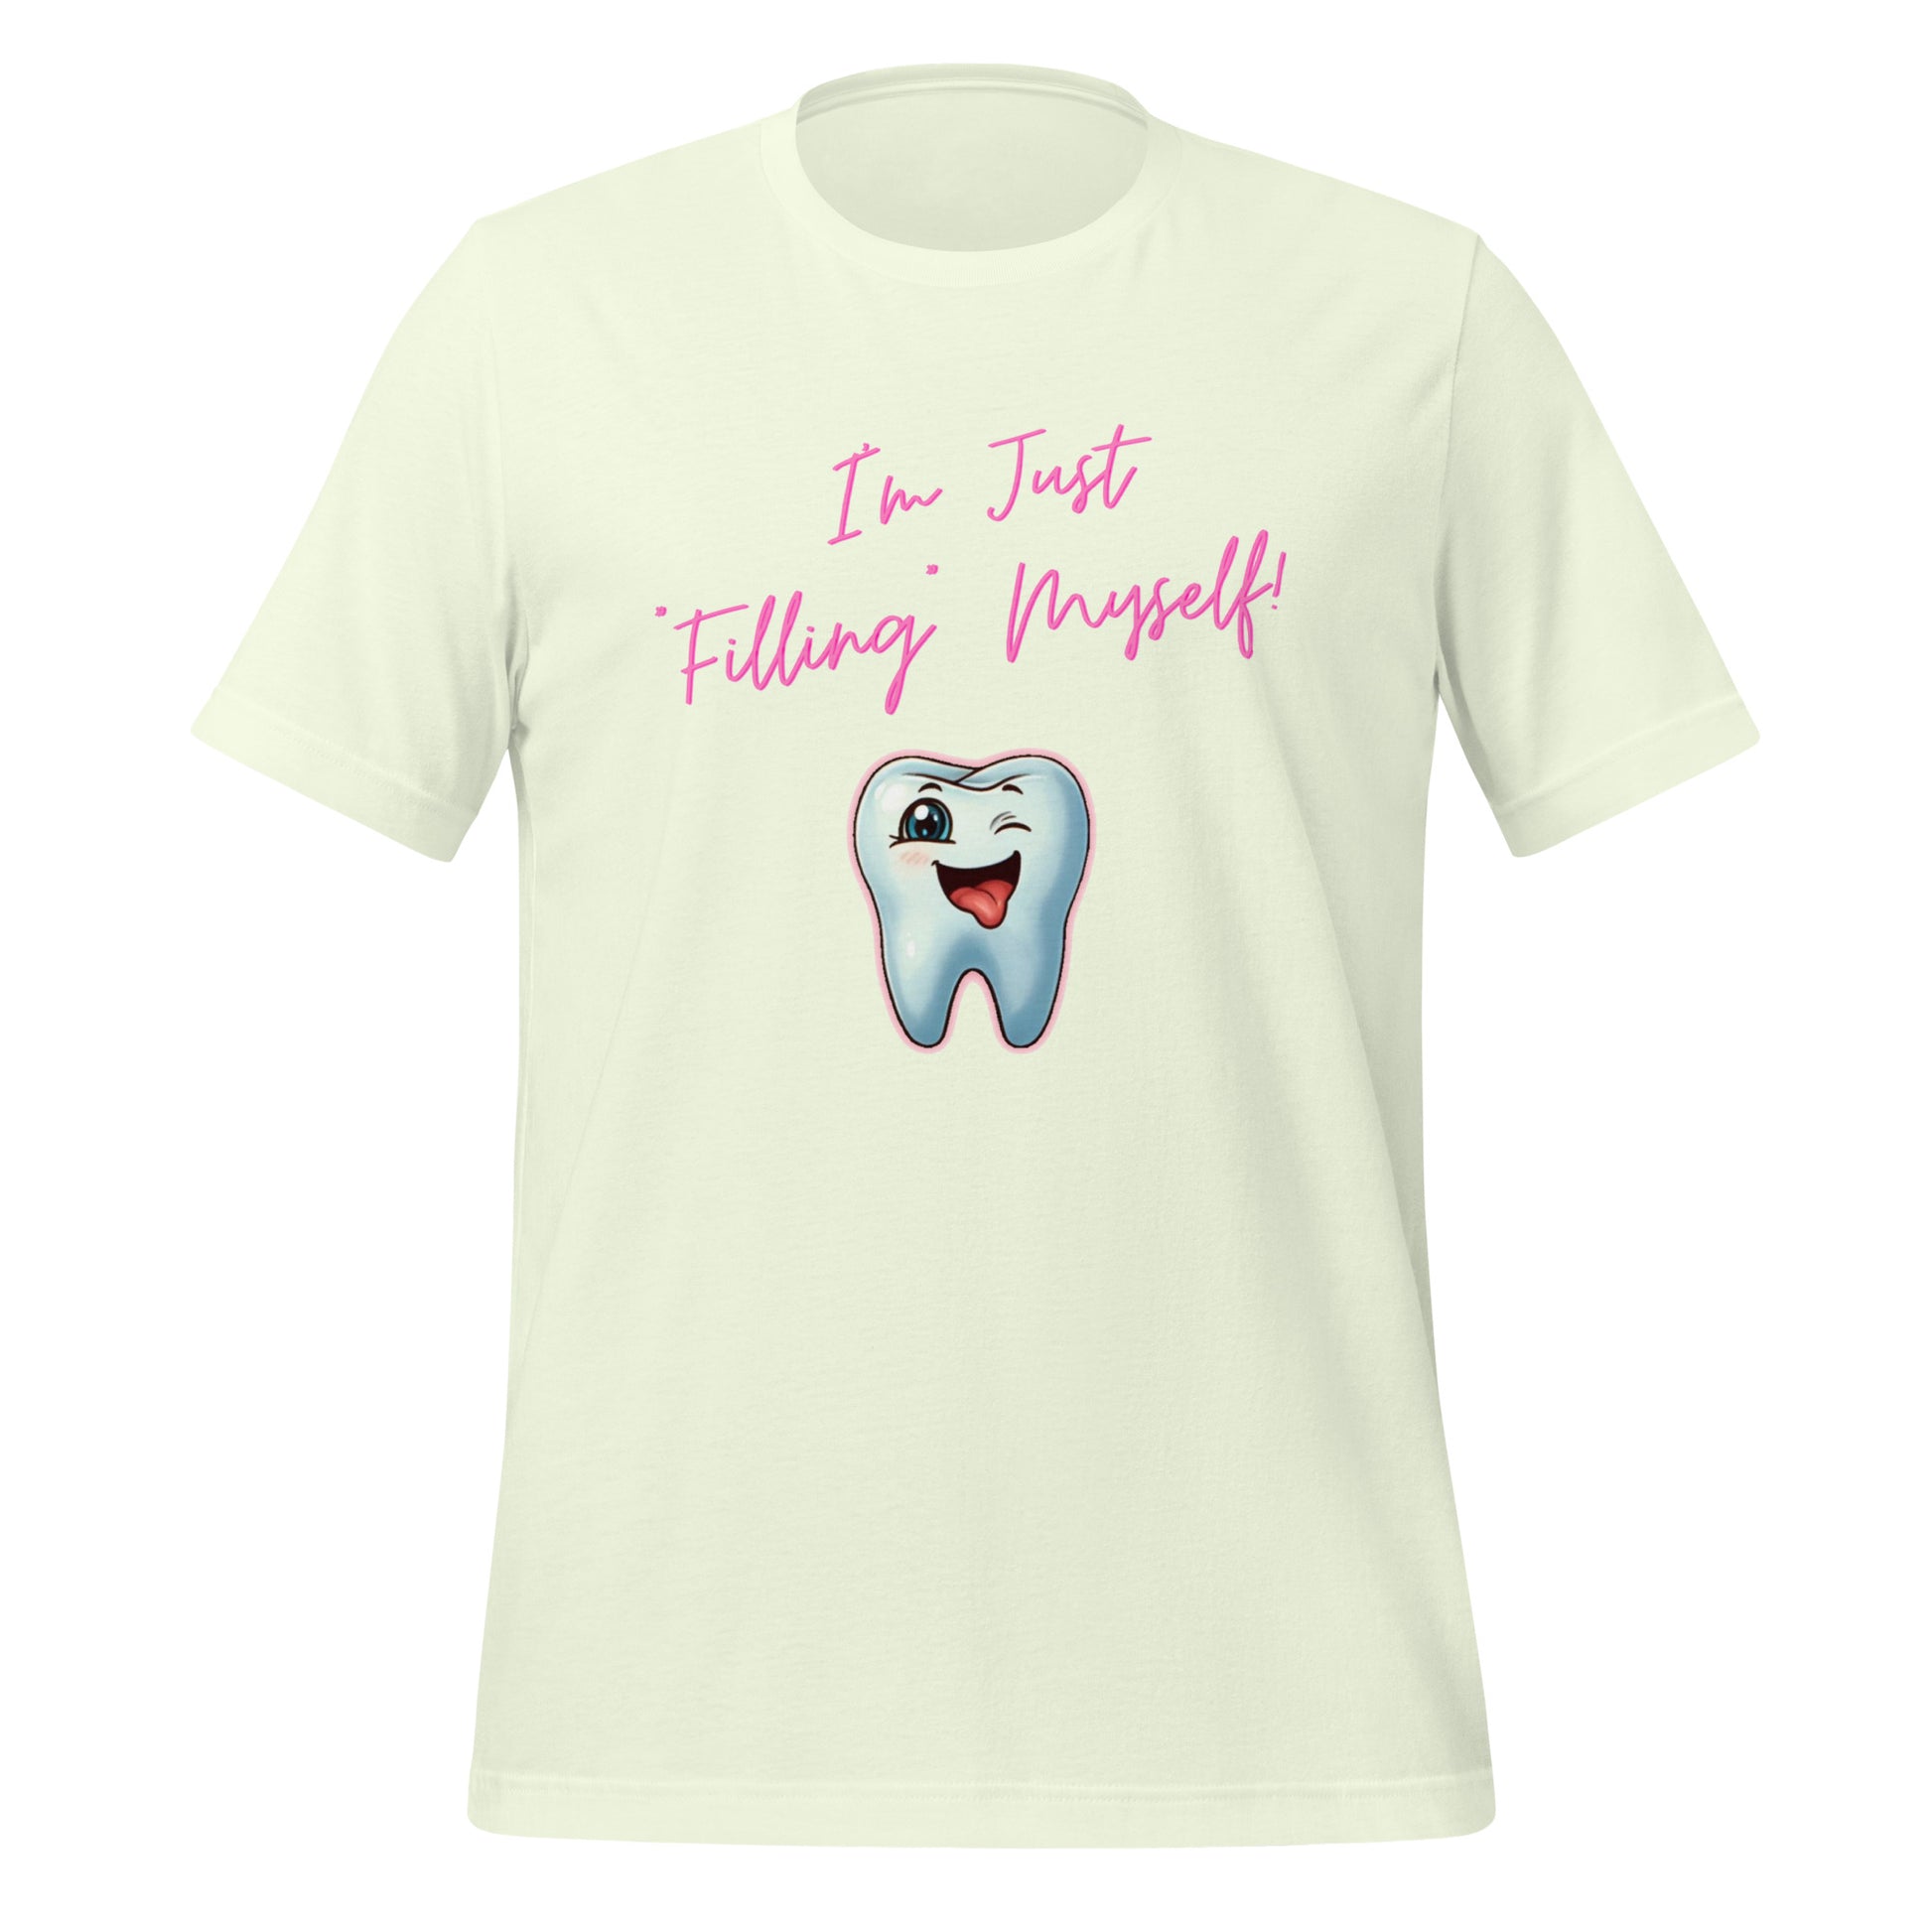 Flirtatious winking cartoon tooth character with the phrase "I'm just filling myself!" Ideal for a funny dental t-shirt or a cute dental assistant shirt. Citron color. 